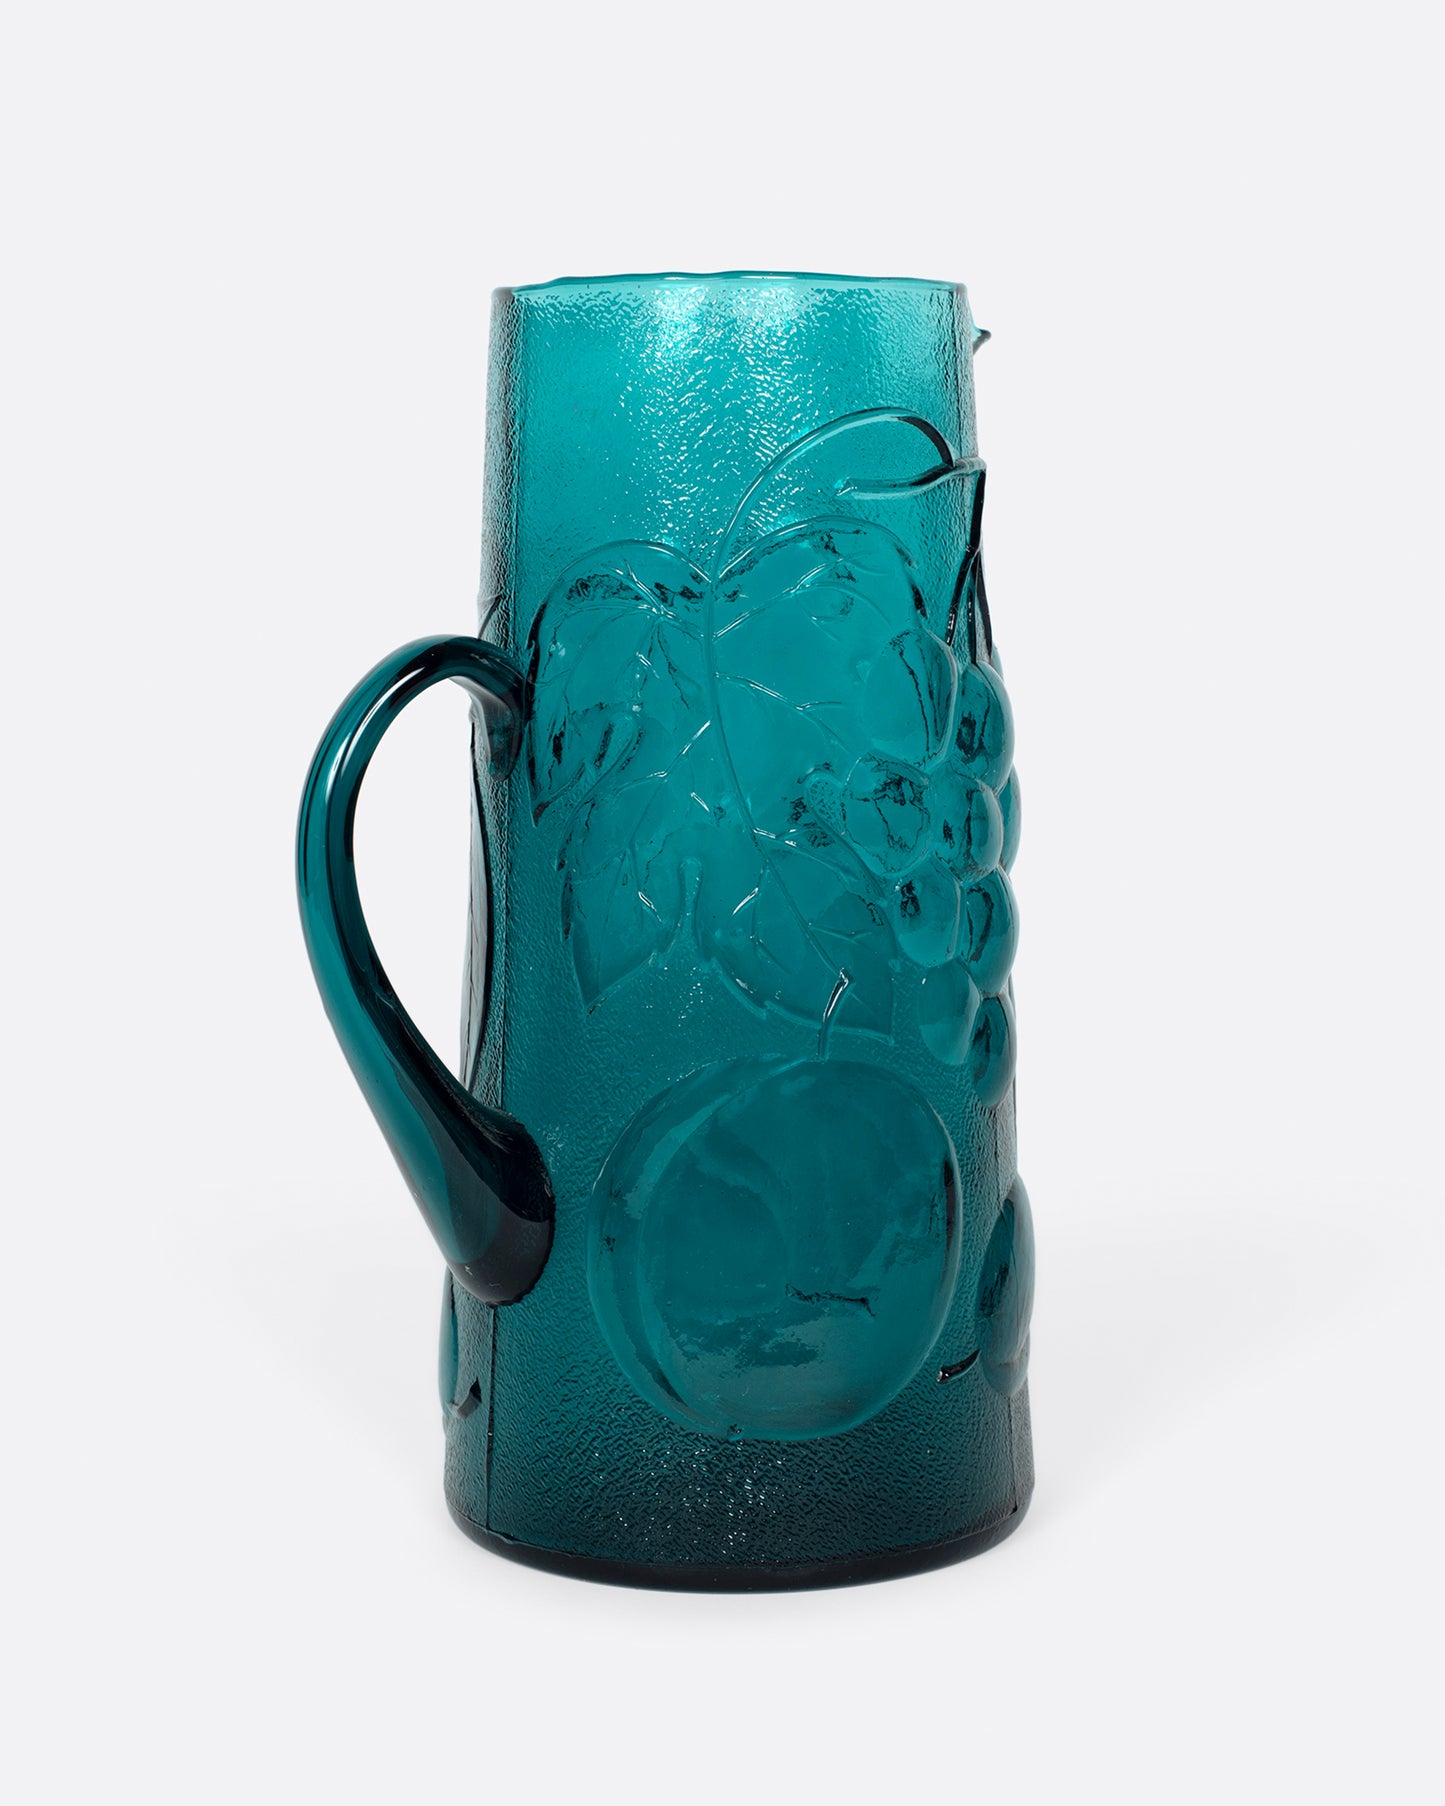 This teal glass set has a subtle fruity texture.